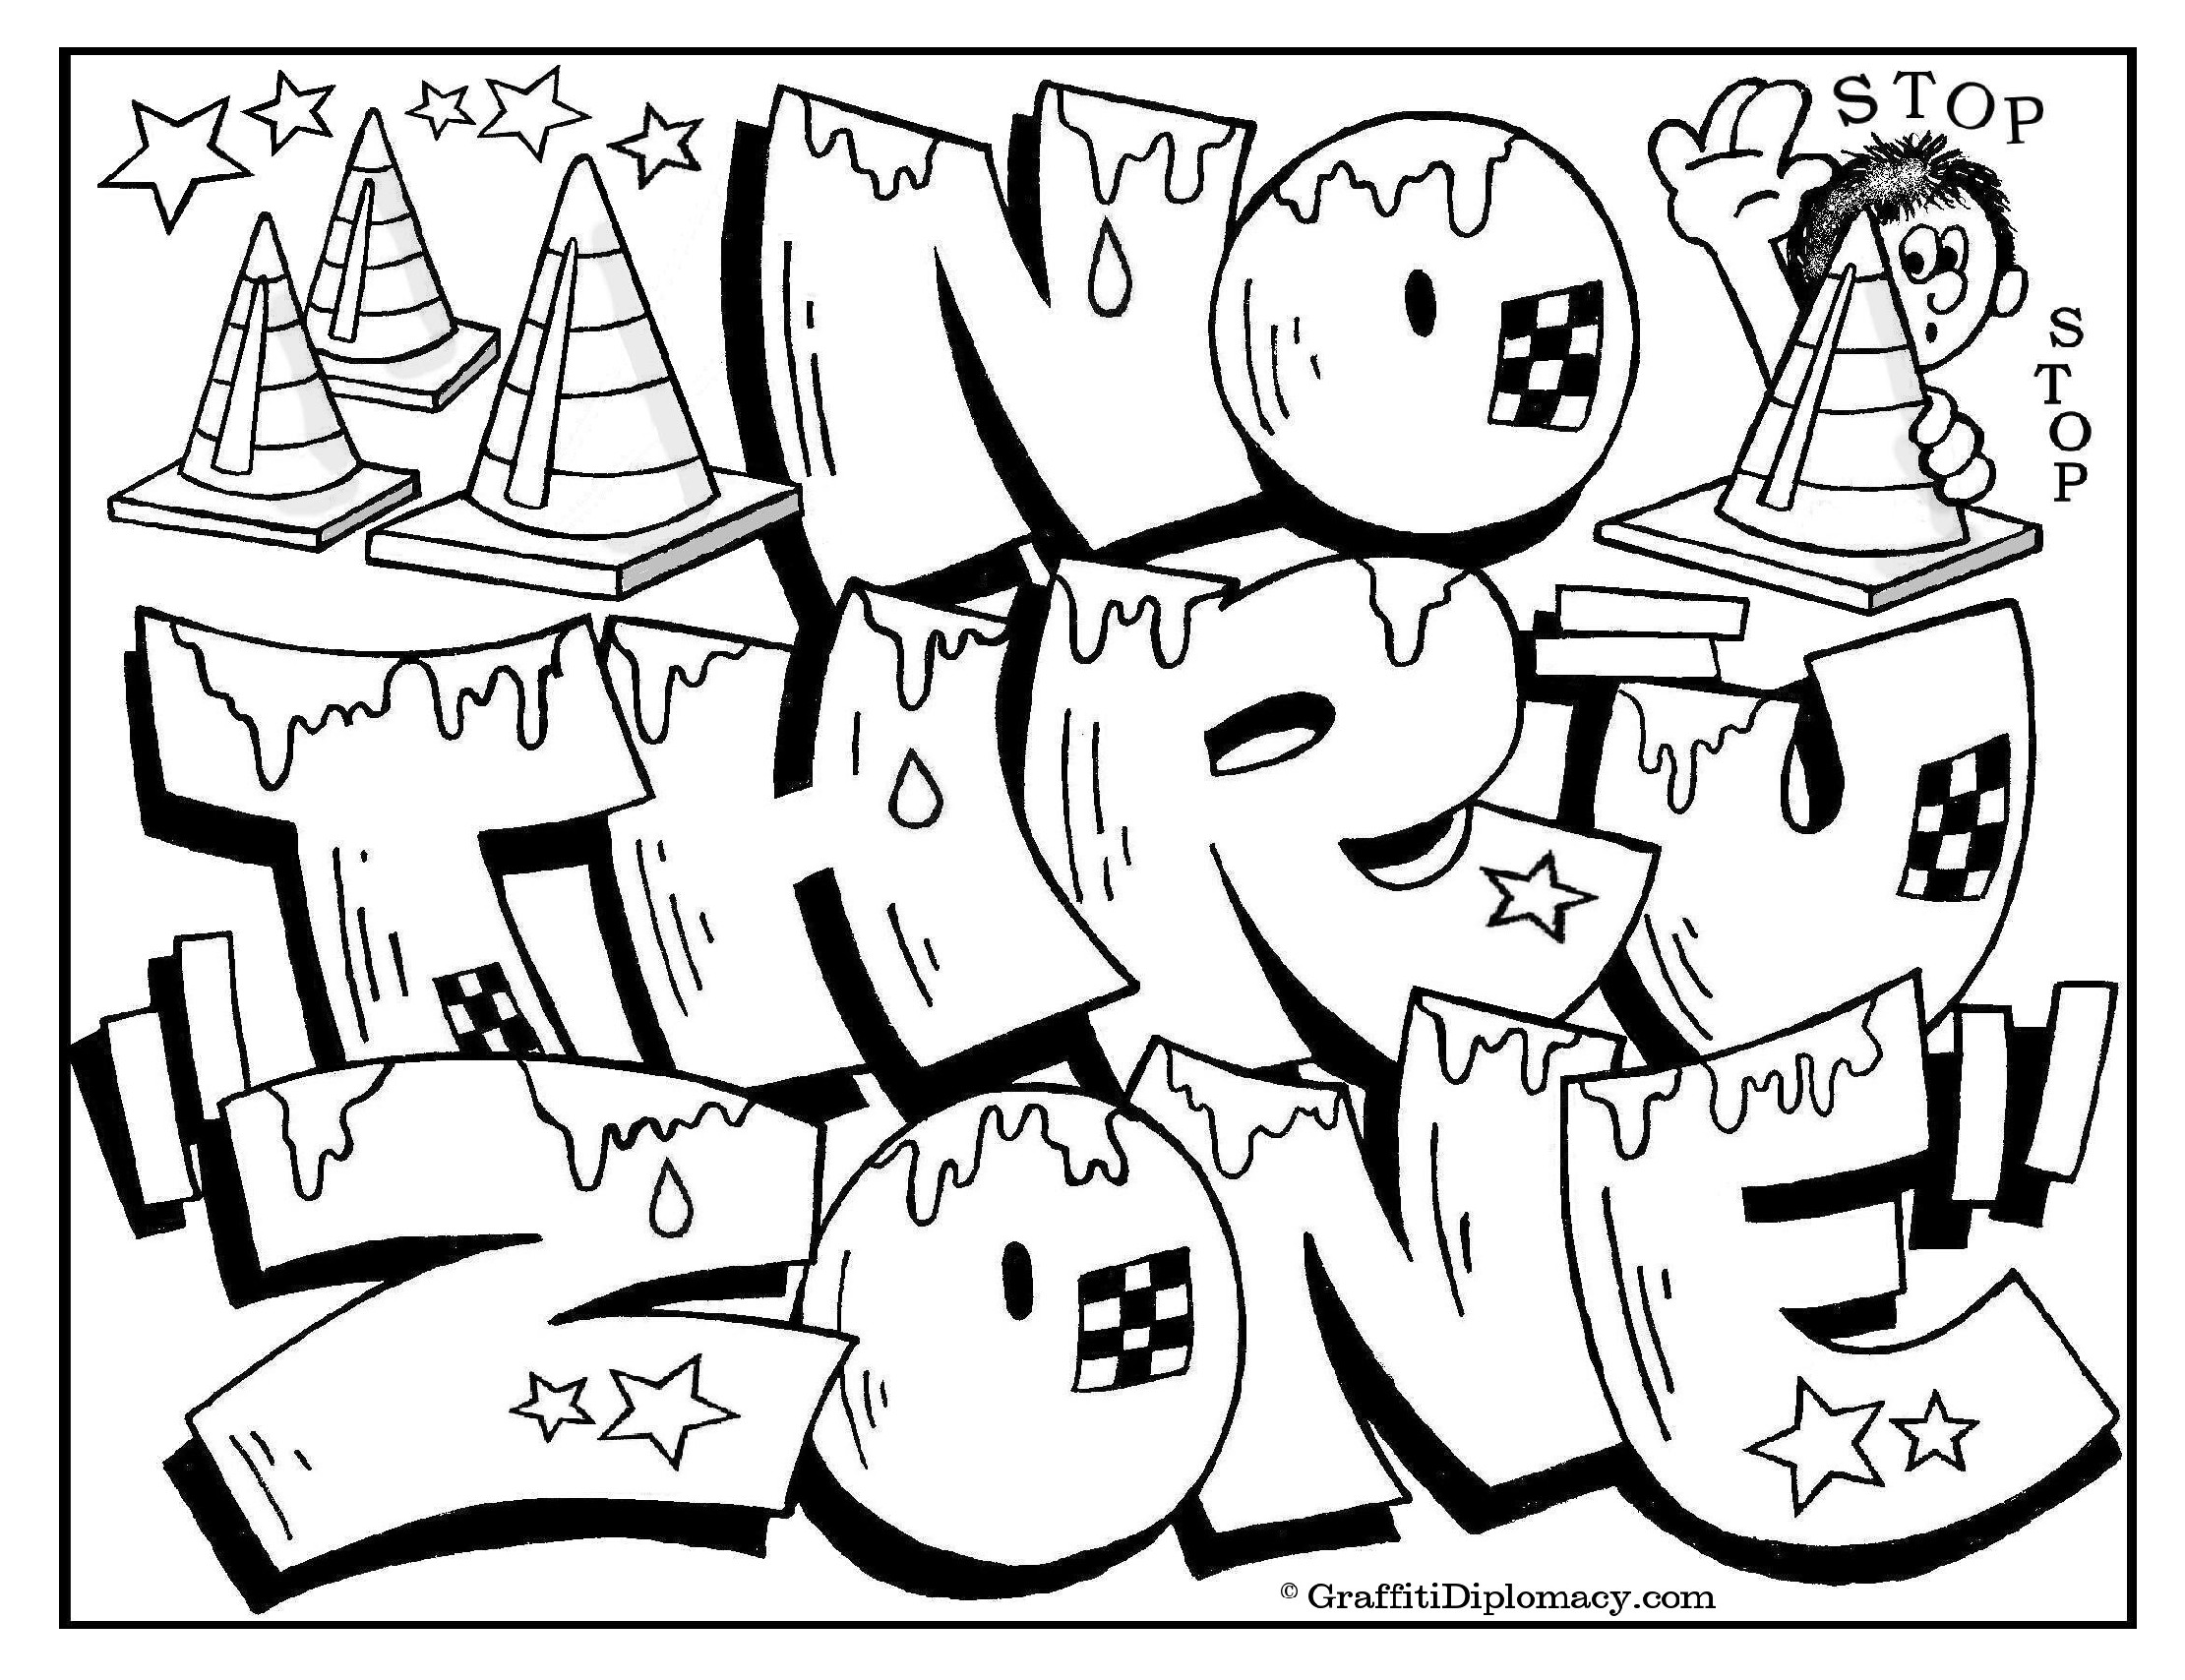 Graffiti Art Coloring Pages For Teenagers Coloring Pages